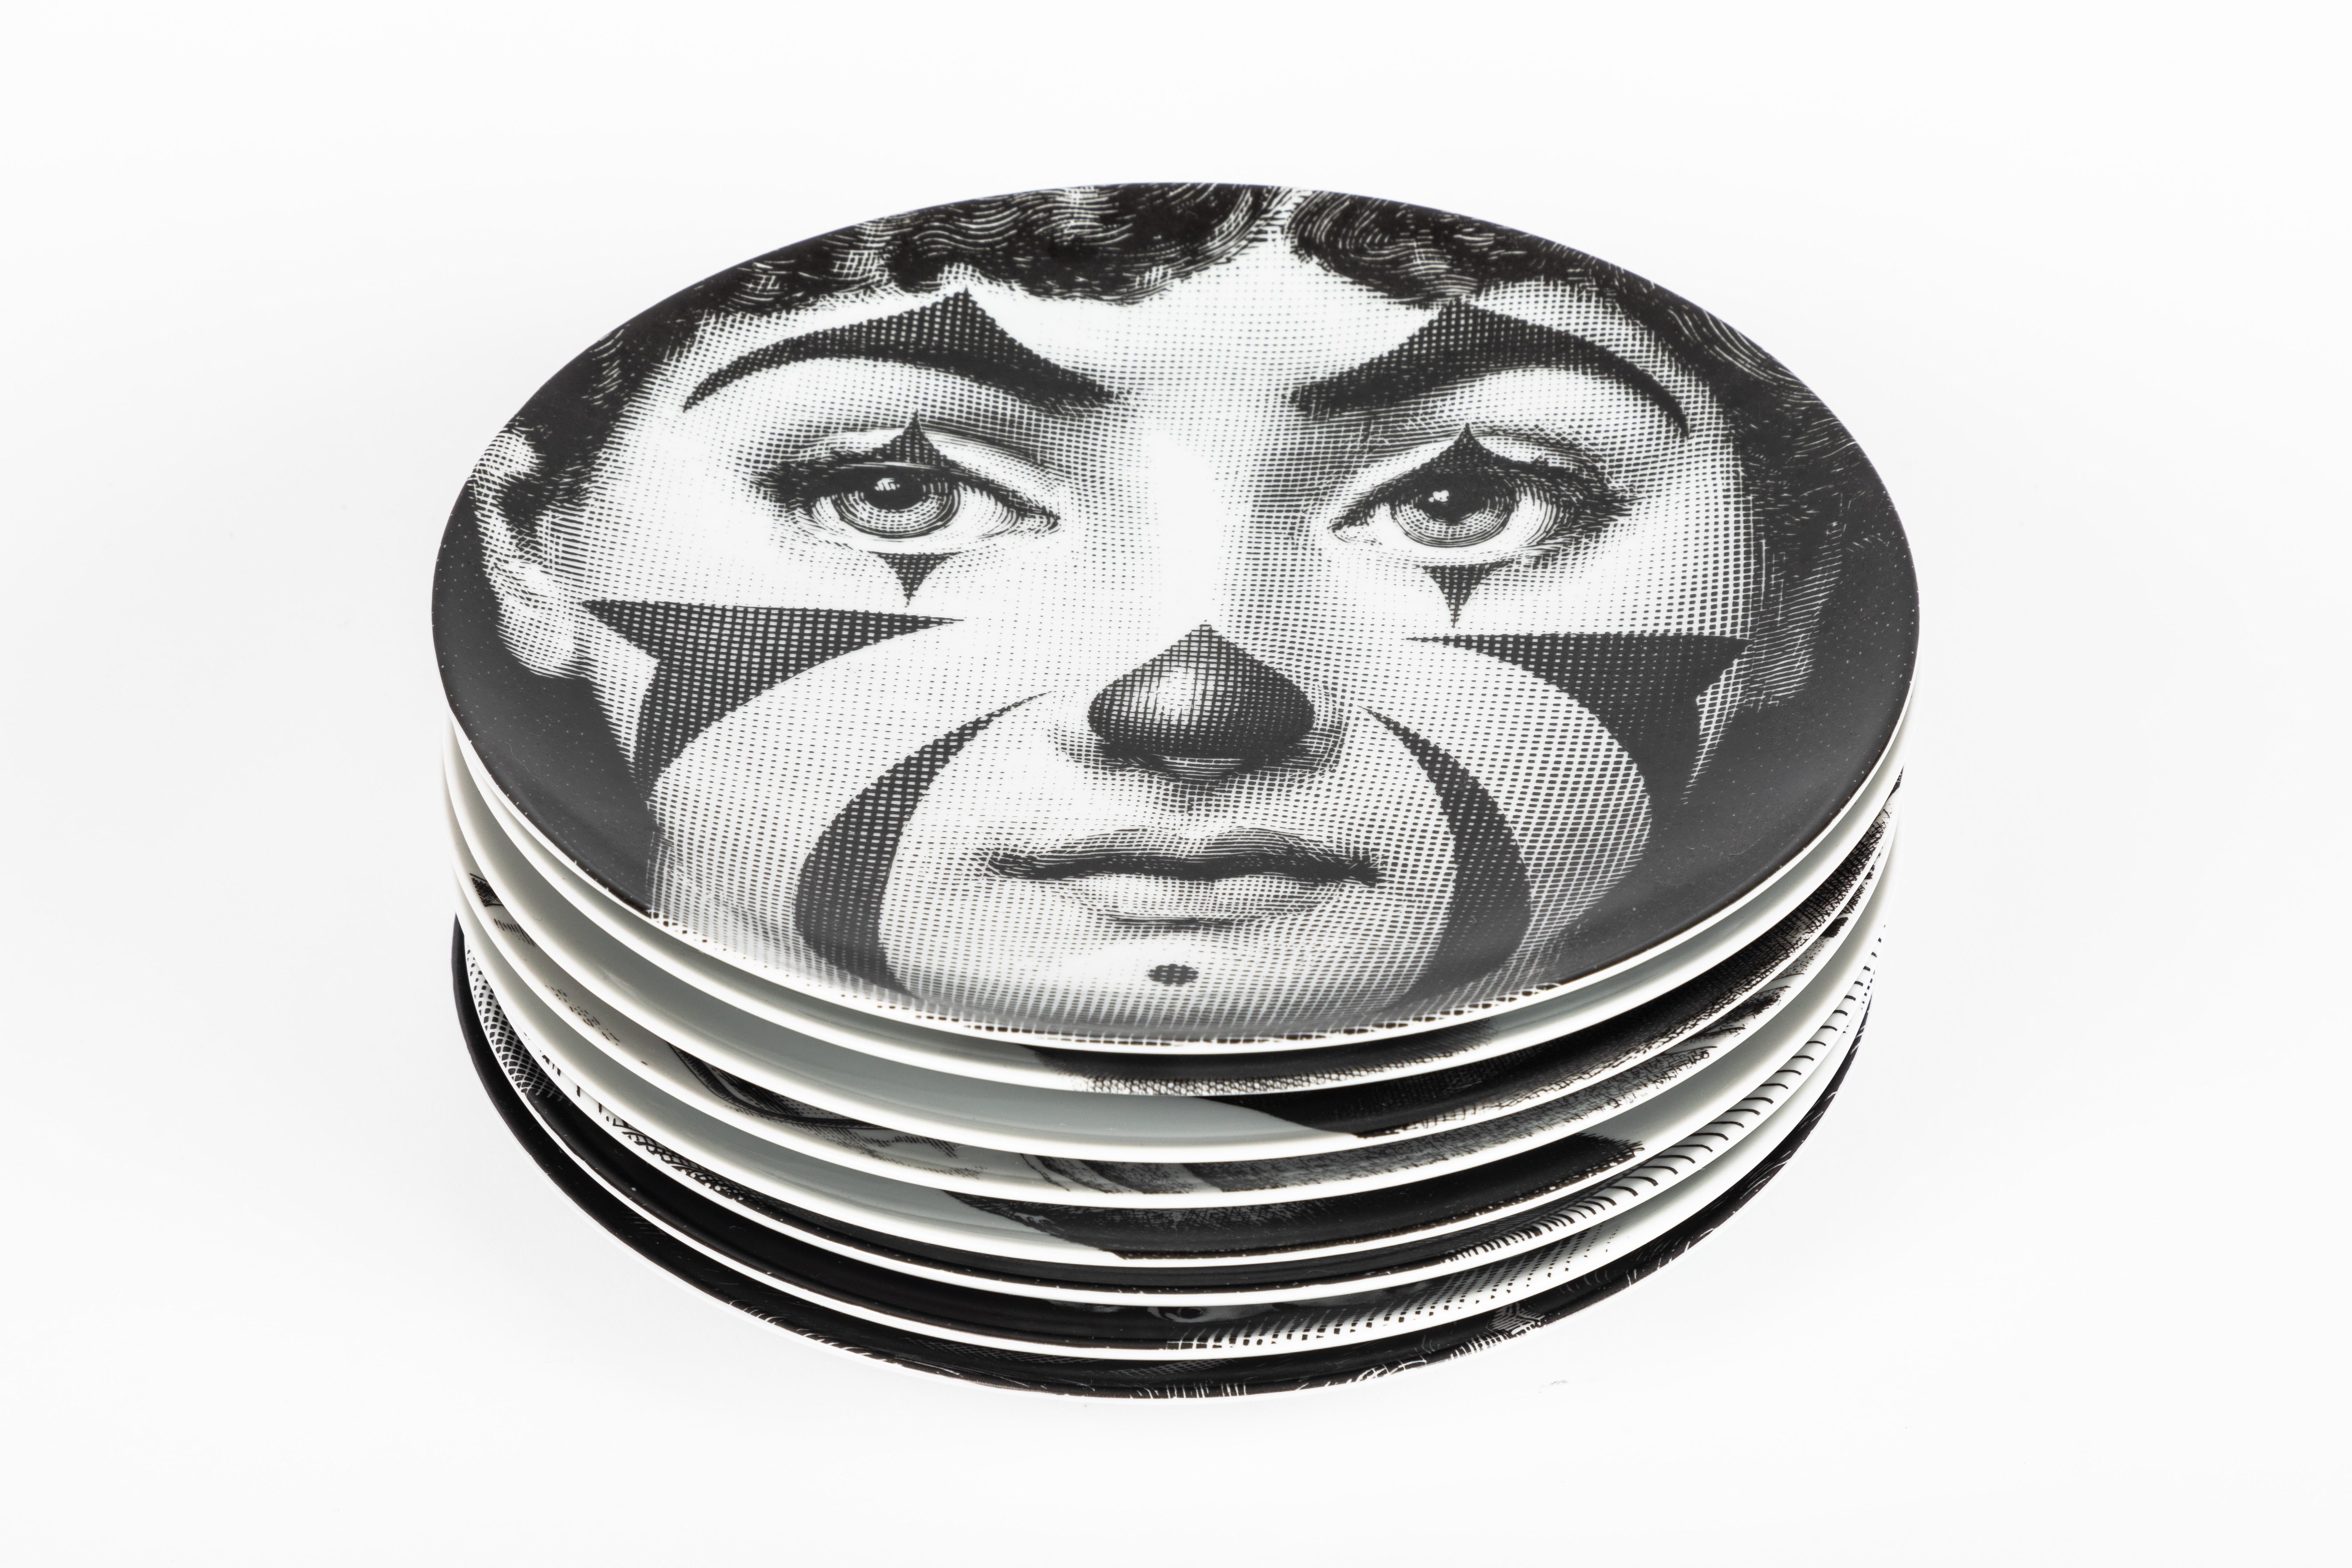 Eight different Fornasetti Tema e Variazioni plates depicting Lina Cavalieri, the muse of Piero Fornasetti (1913-1988). Numbers 9, 107, 122, 173, 215, 218, 321. 

The pricing listed is for an individual plate. We are happy to negotiate an offer for